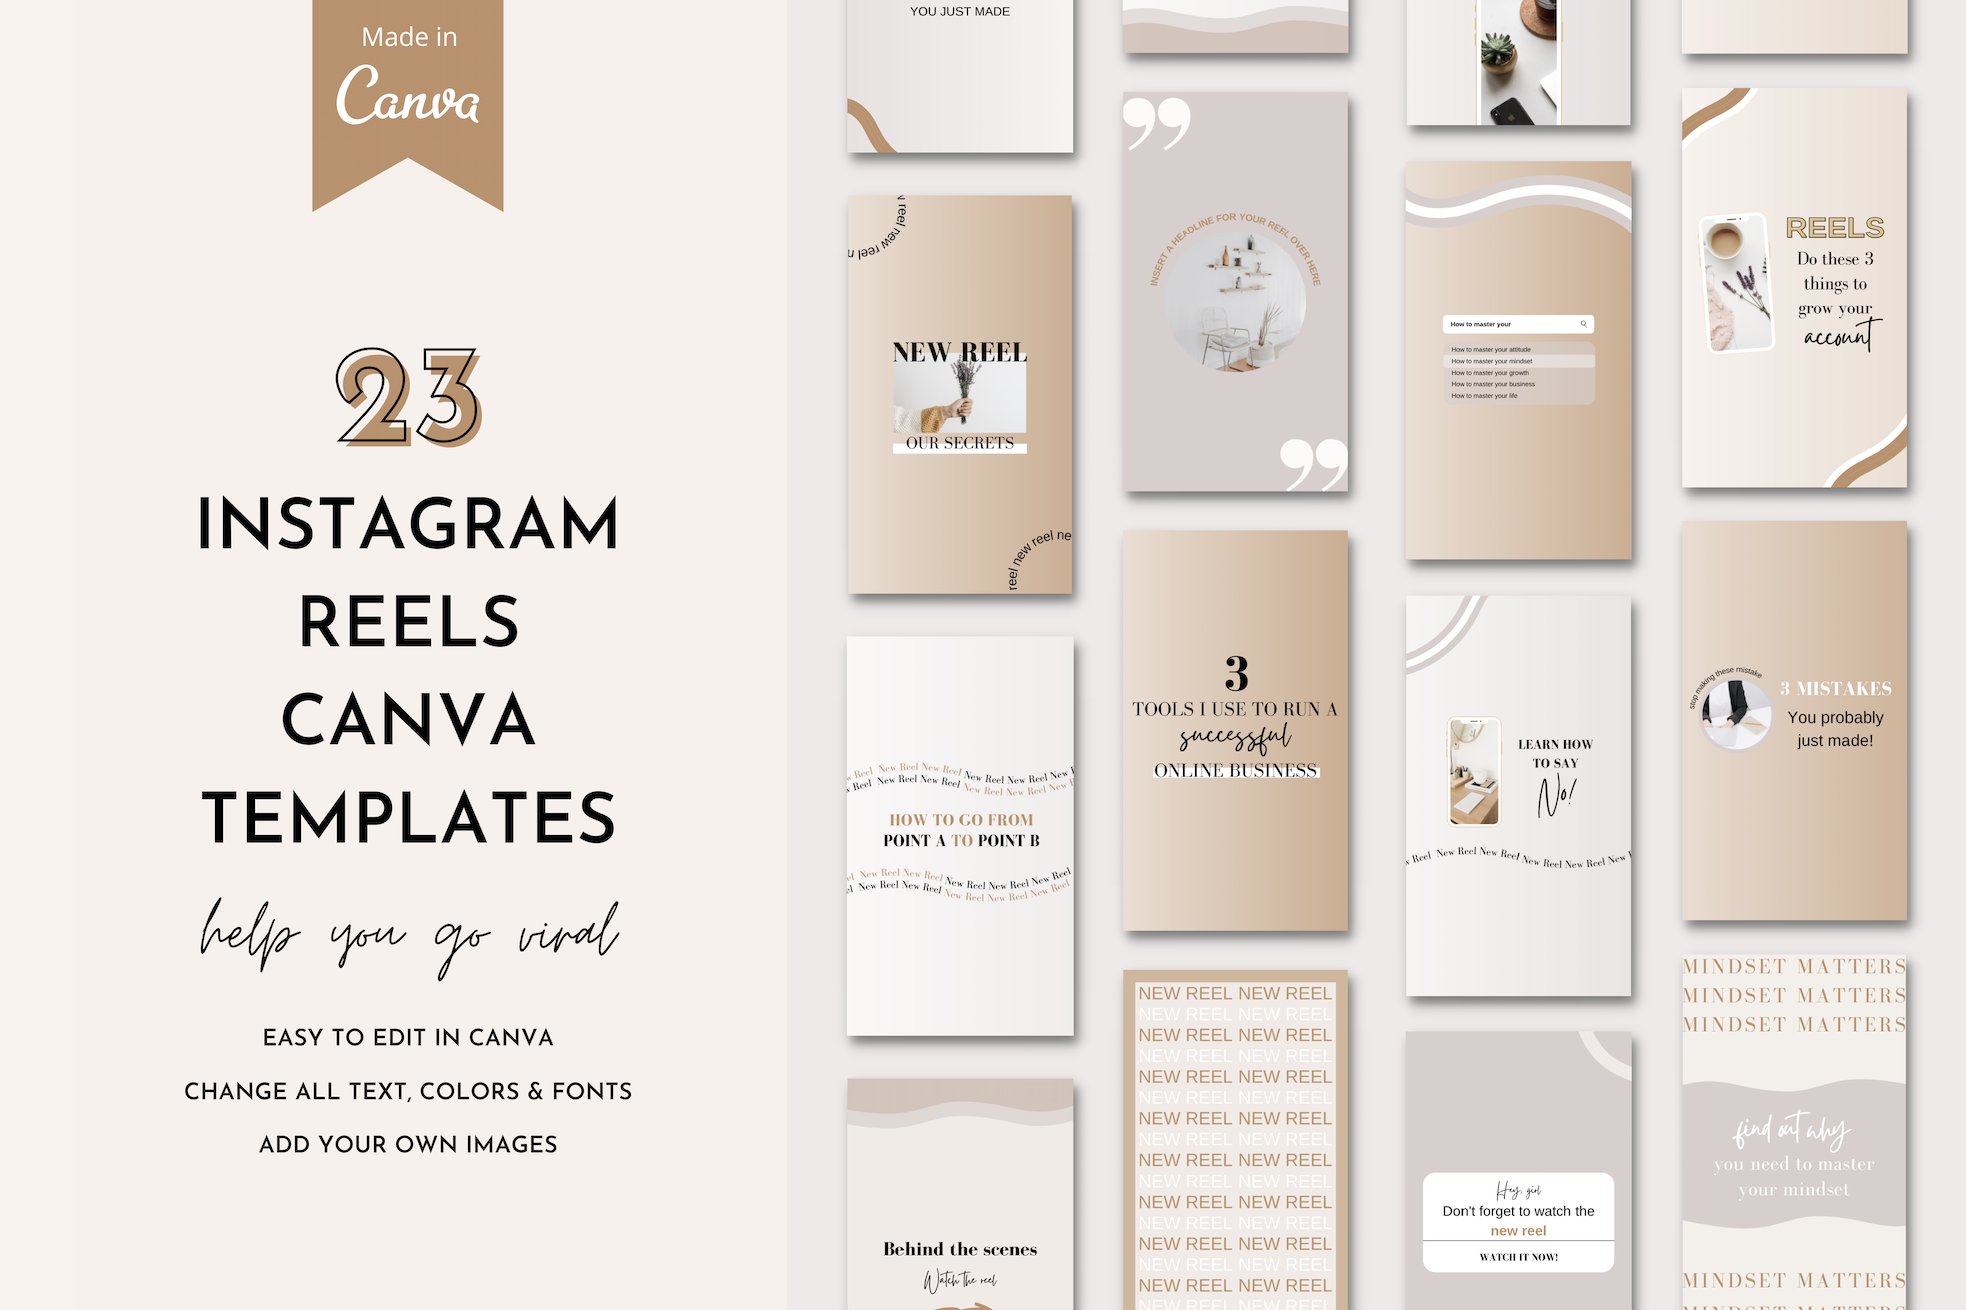 Instagram Reels Canva Template cover image.